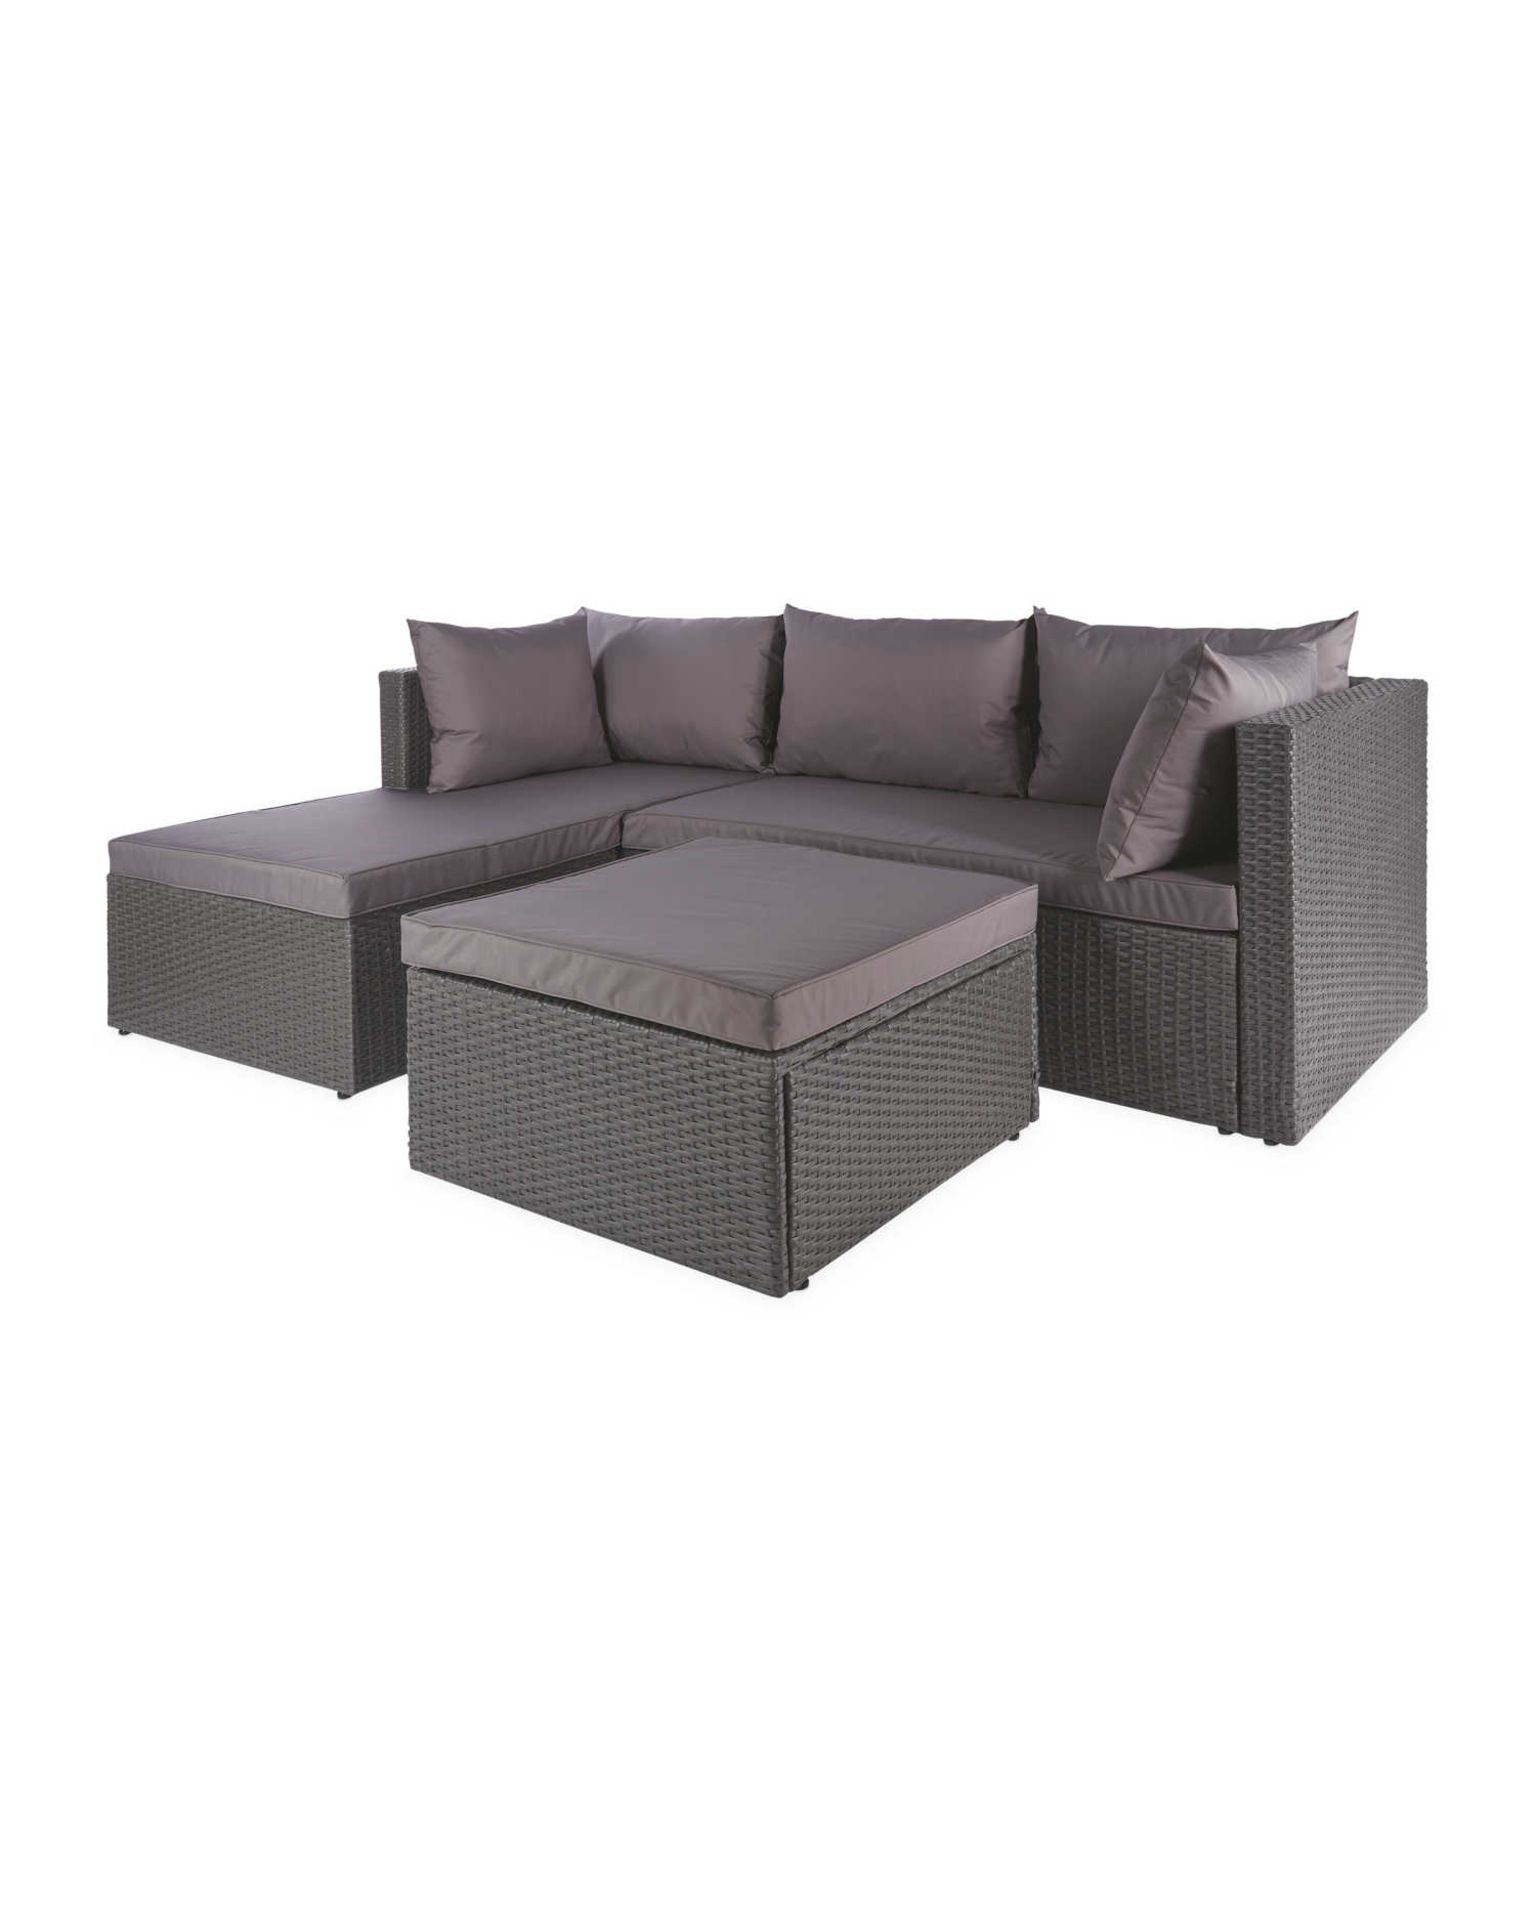 Anthracite Corner Sofa & Cover. Soak in the sun and feel that summer breeze while sitting on your